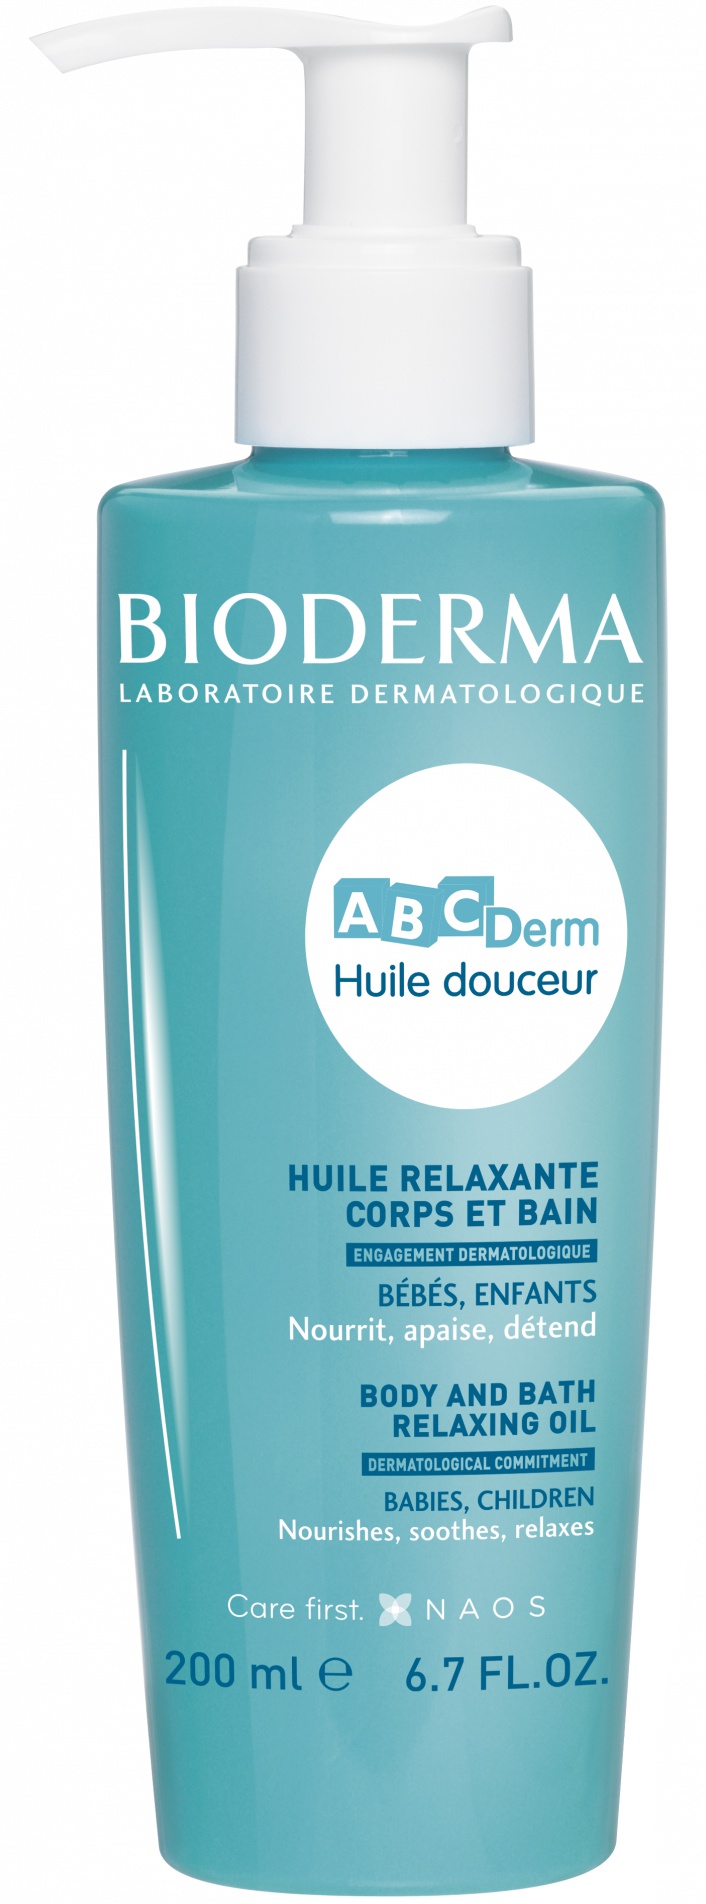 Bioderma ABCDerm Huile Douceur Body And Bath Relaxing Oil